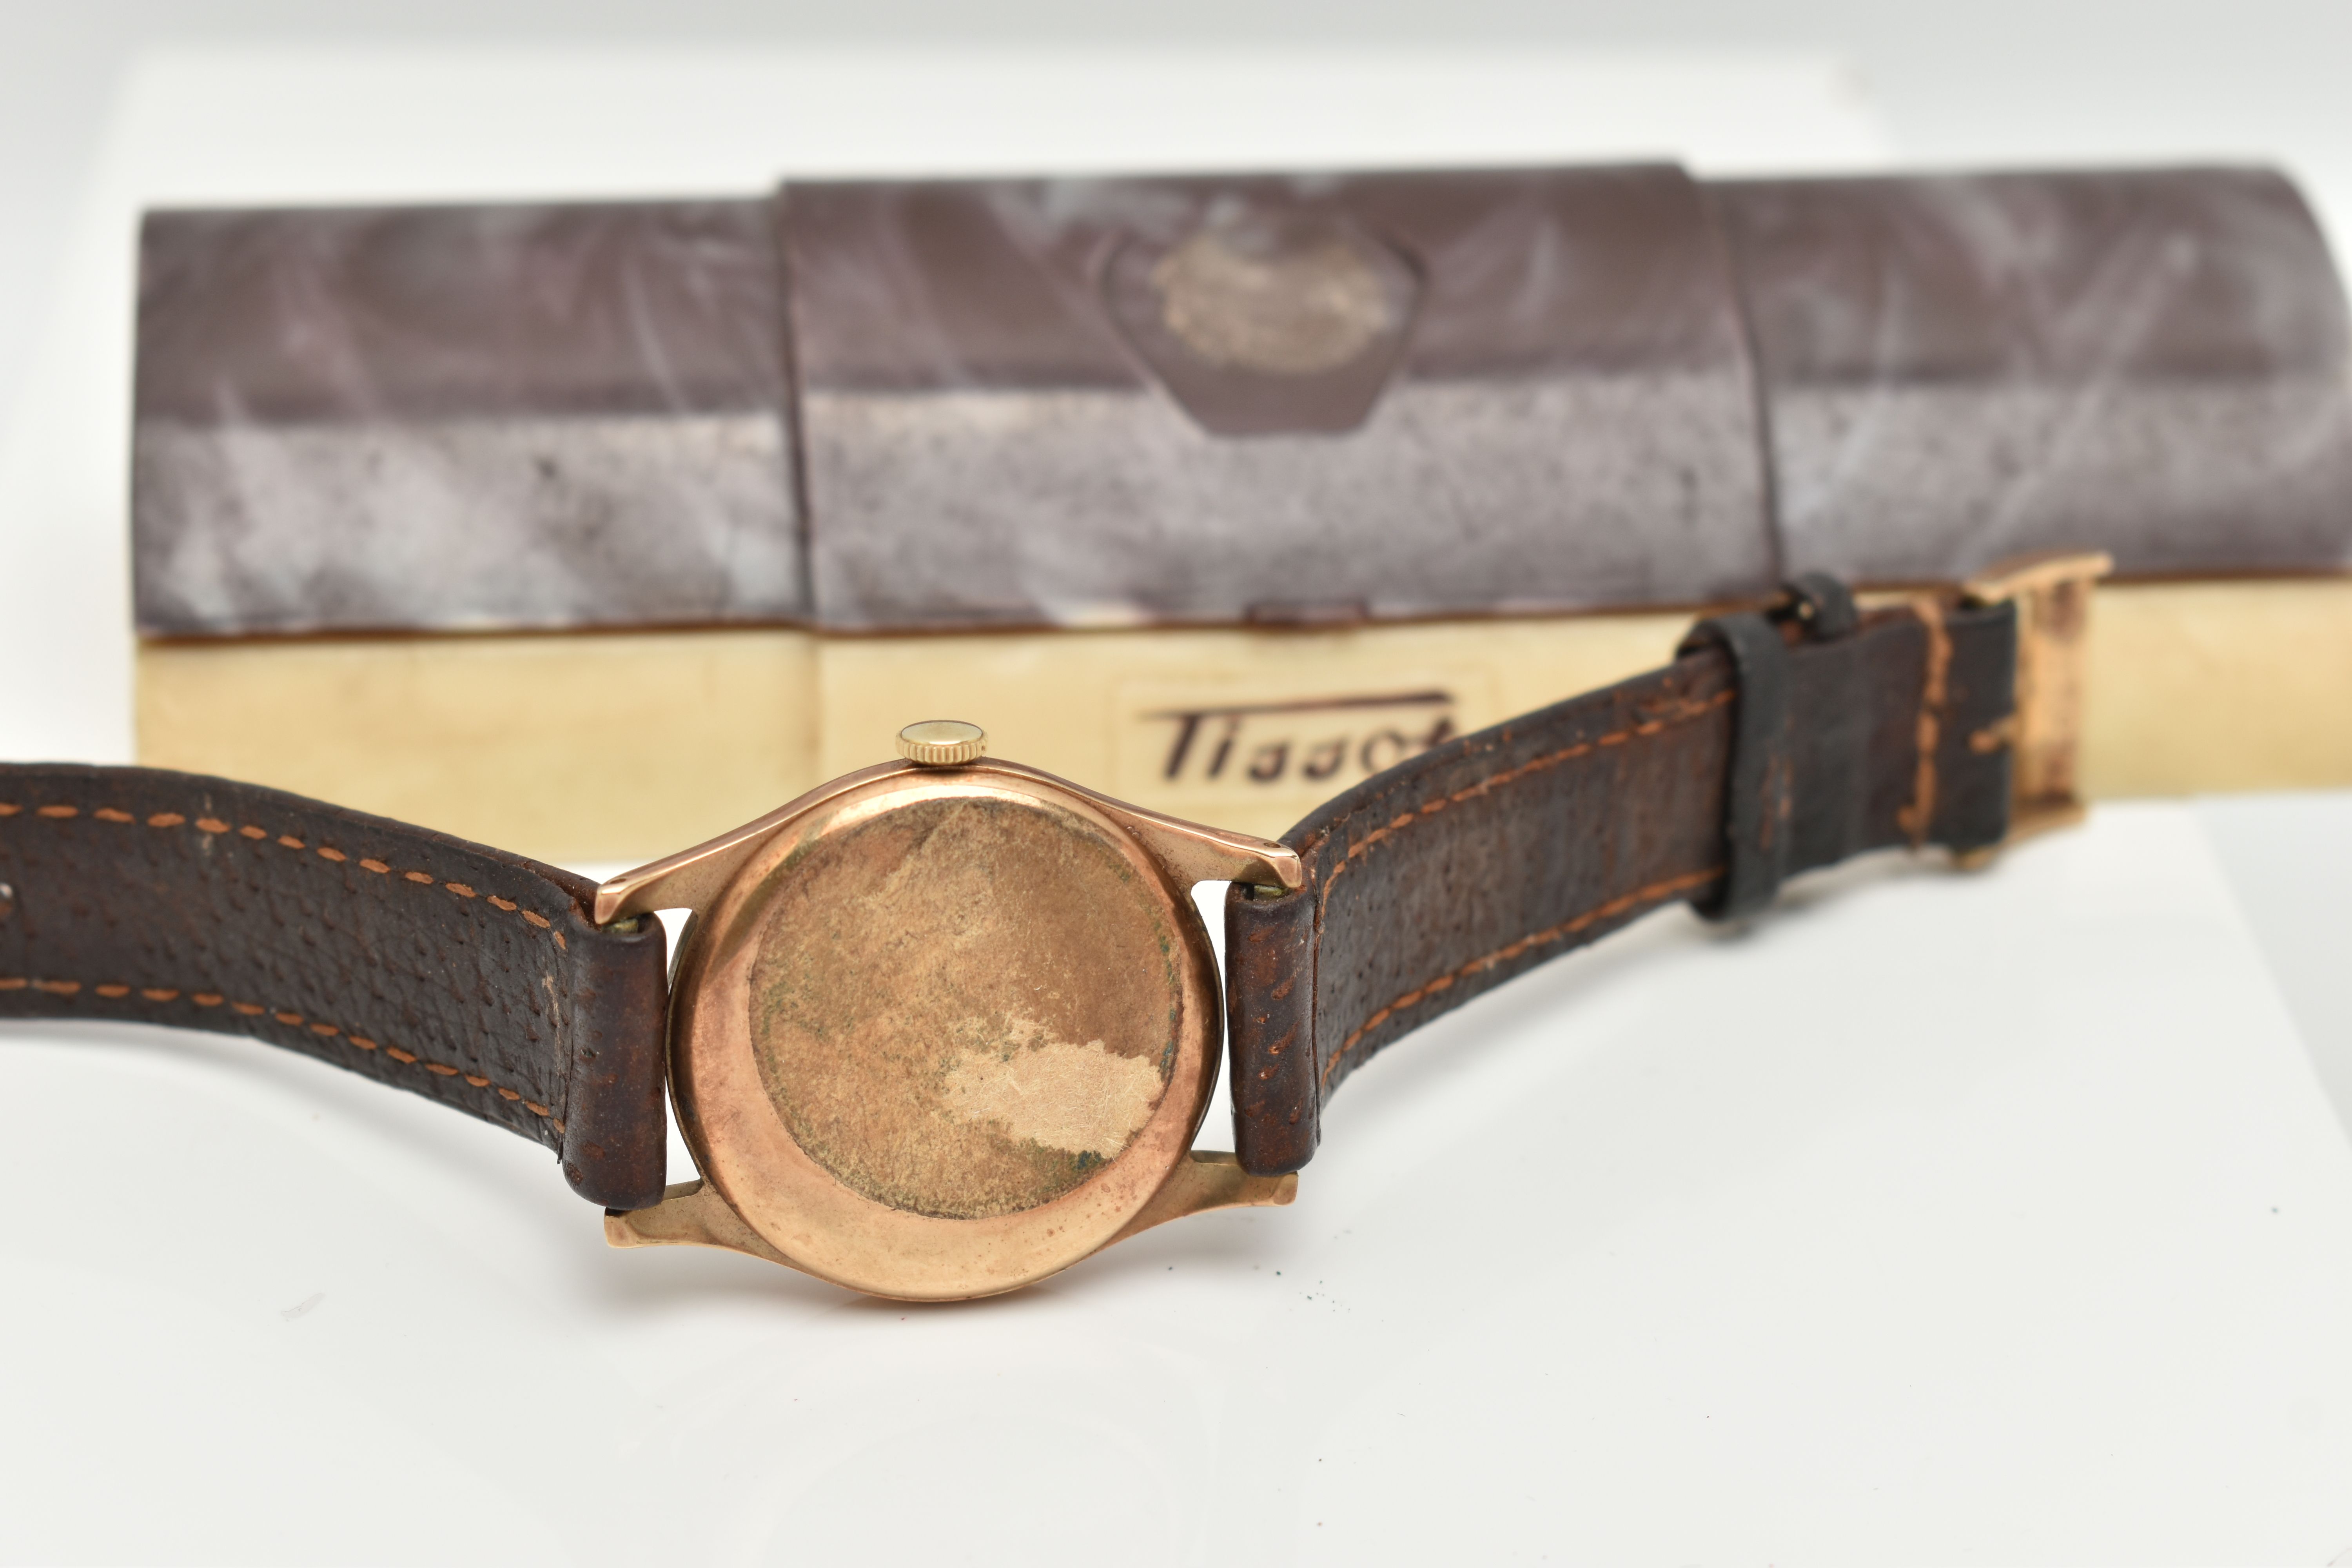 A GENTS BOXED 'TISSOT' WRISTWATCH, manual wind, round silver dial signed 'Tissot Antimagnetique', - Image 5 of 6